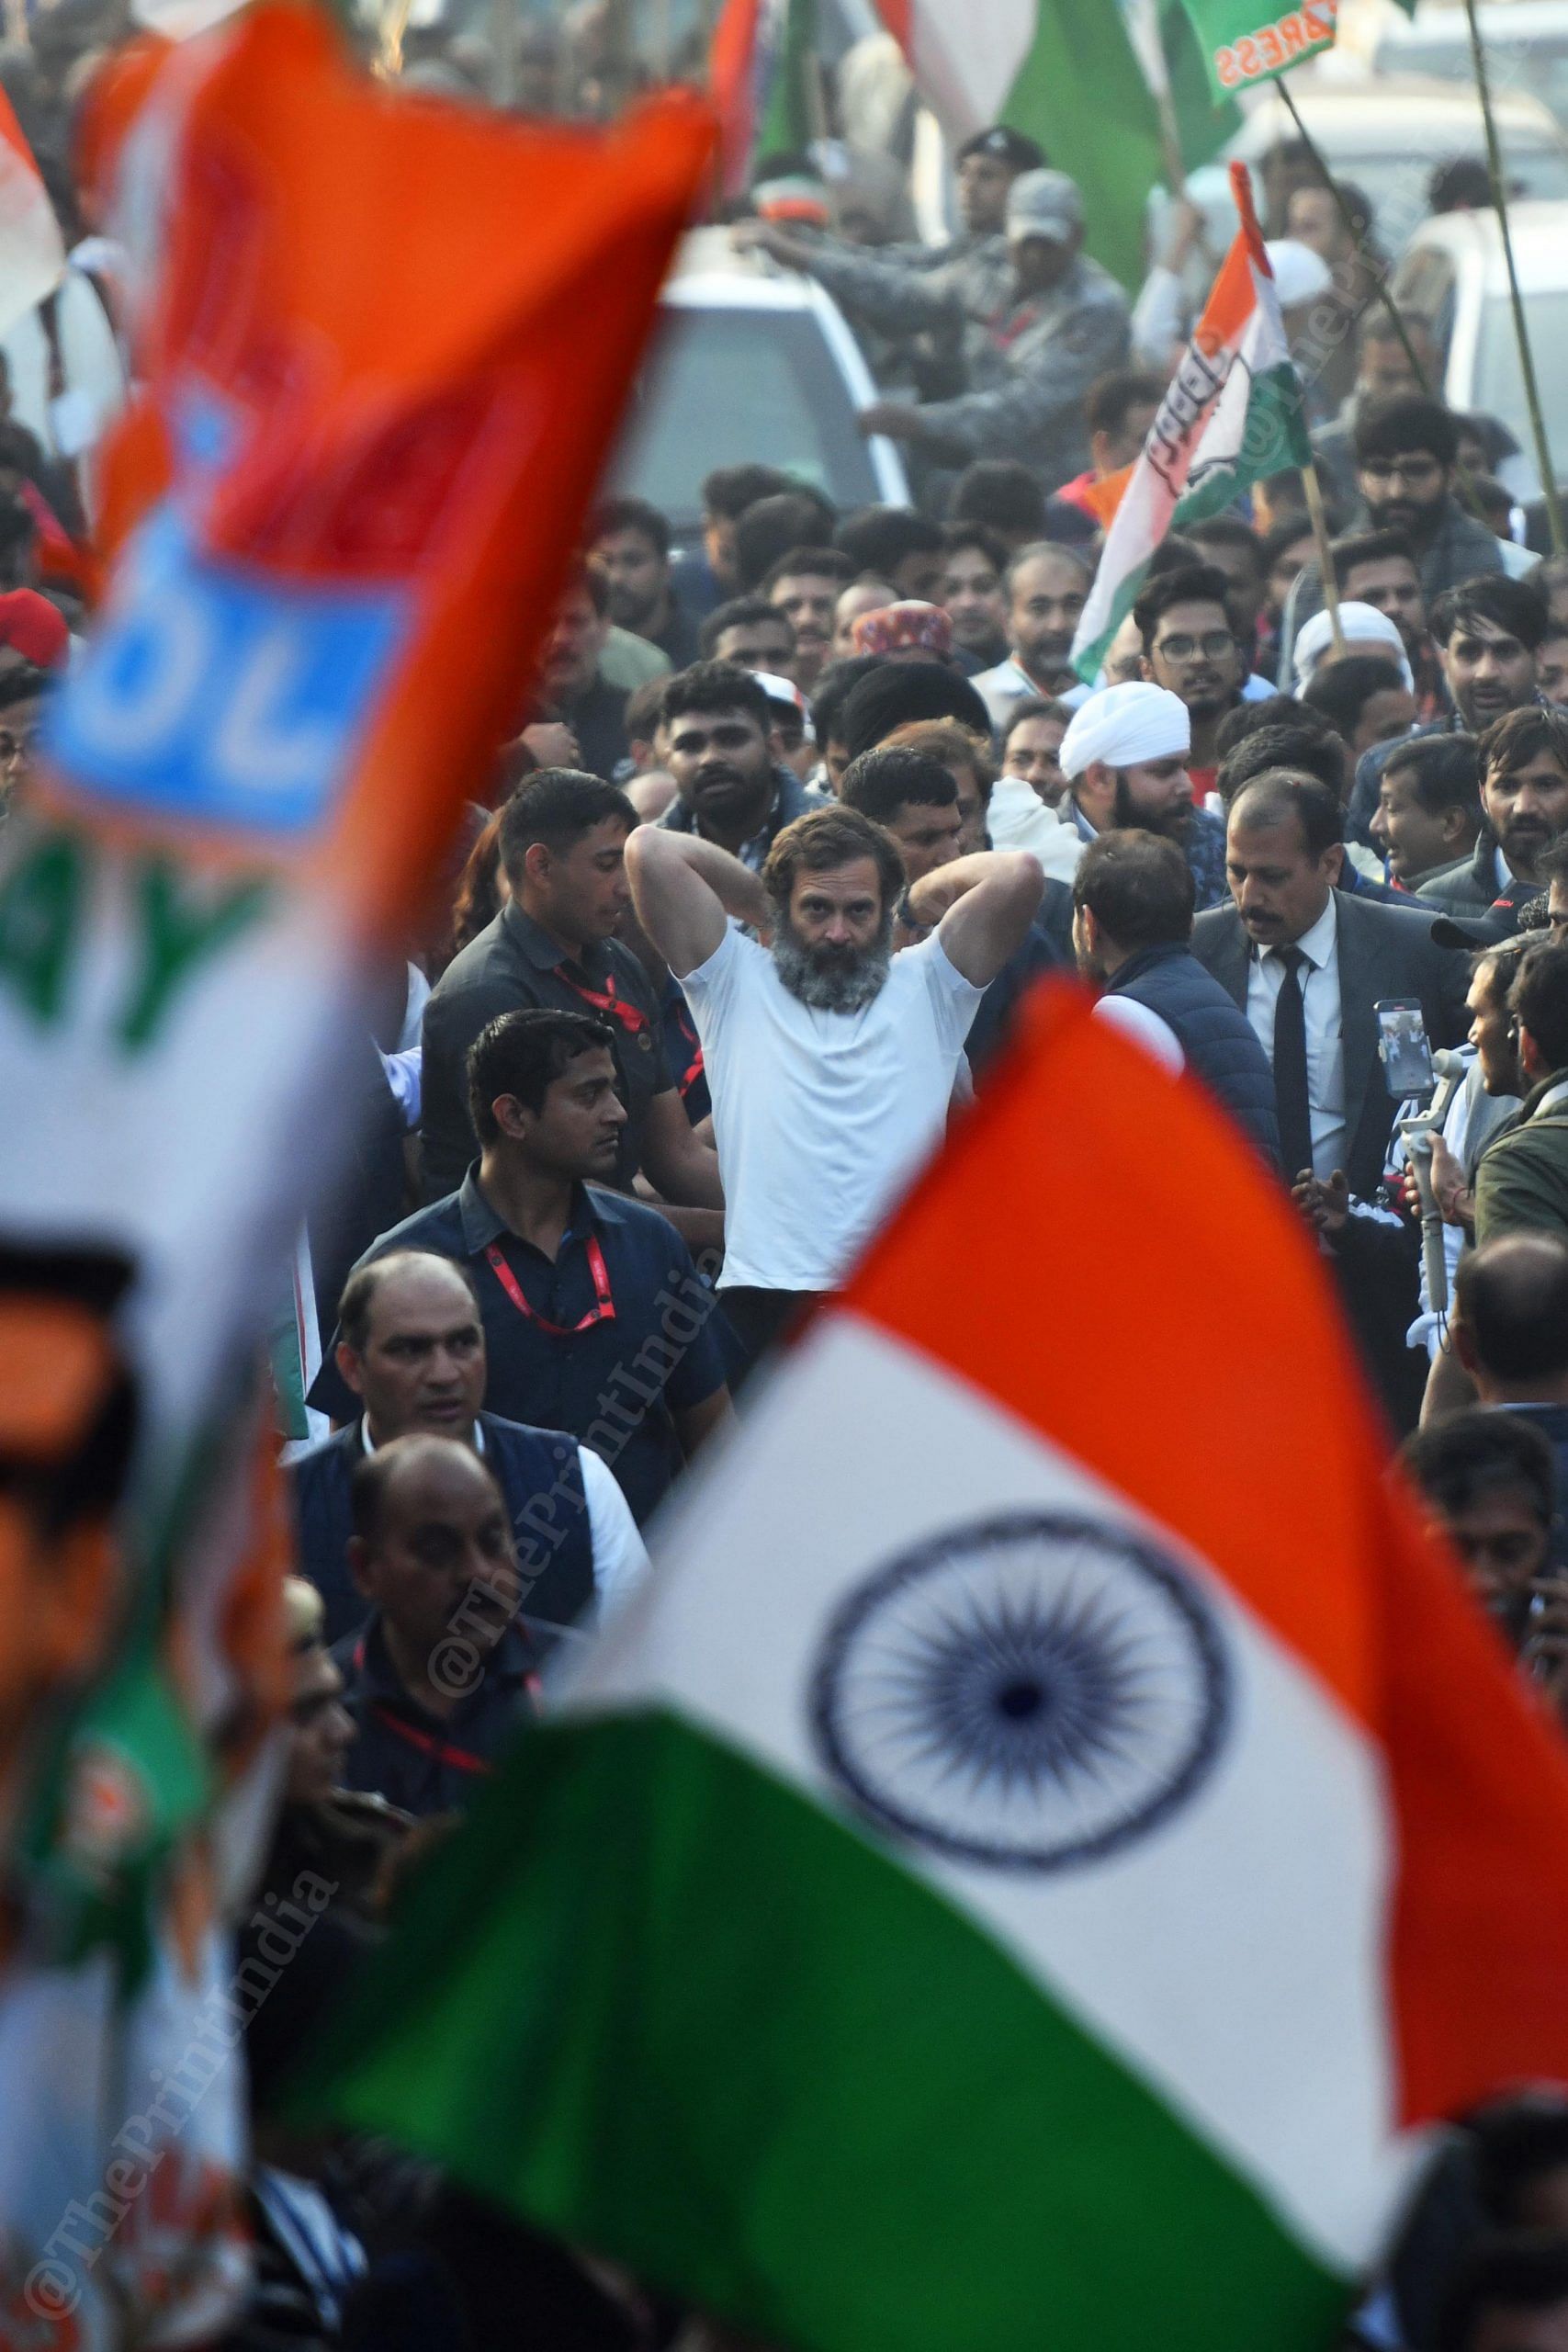 Rahul, surrounded by a crowd of followers | Photo: Suraj Singh Bisht | ThePrint